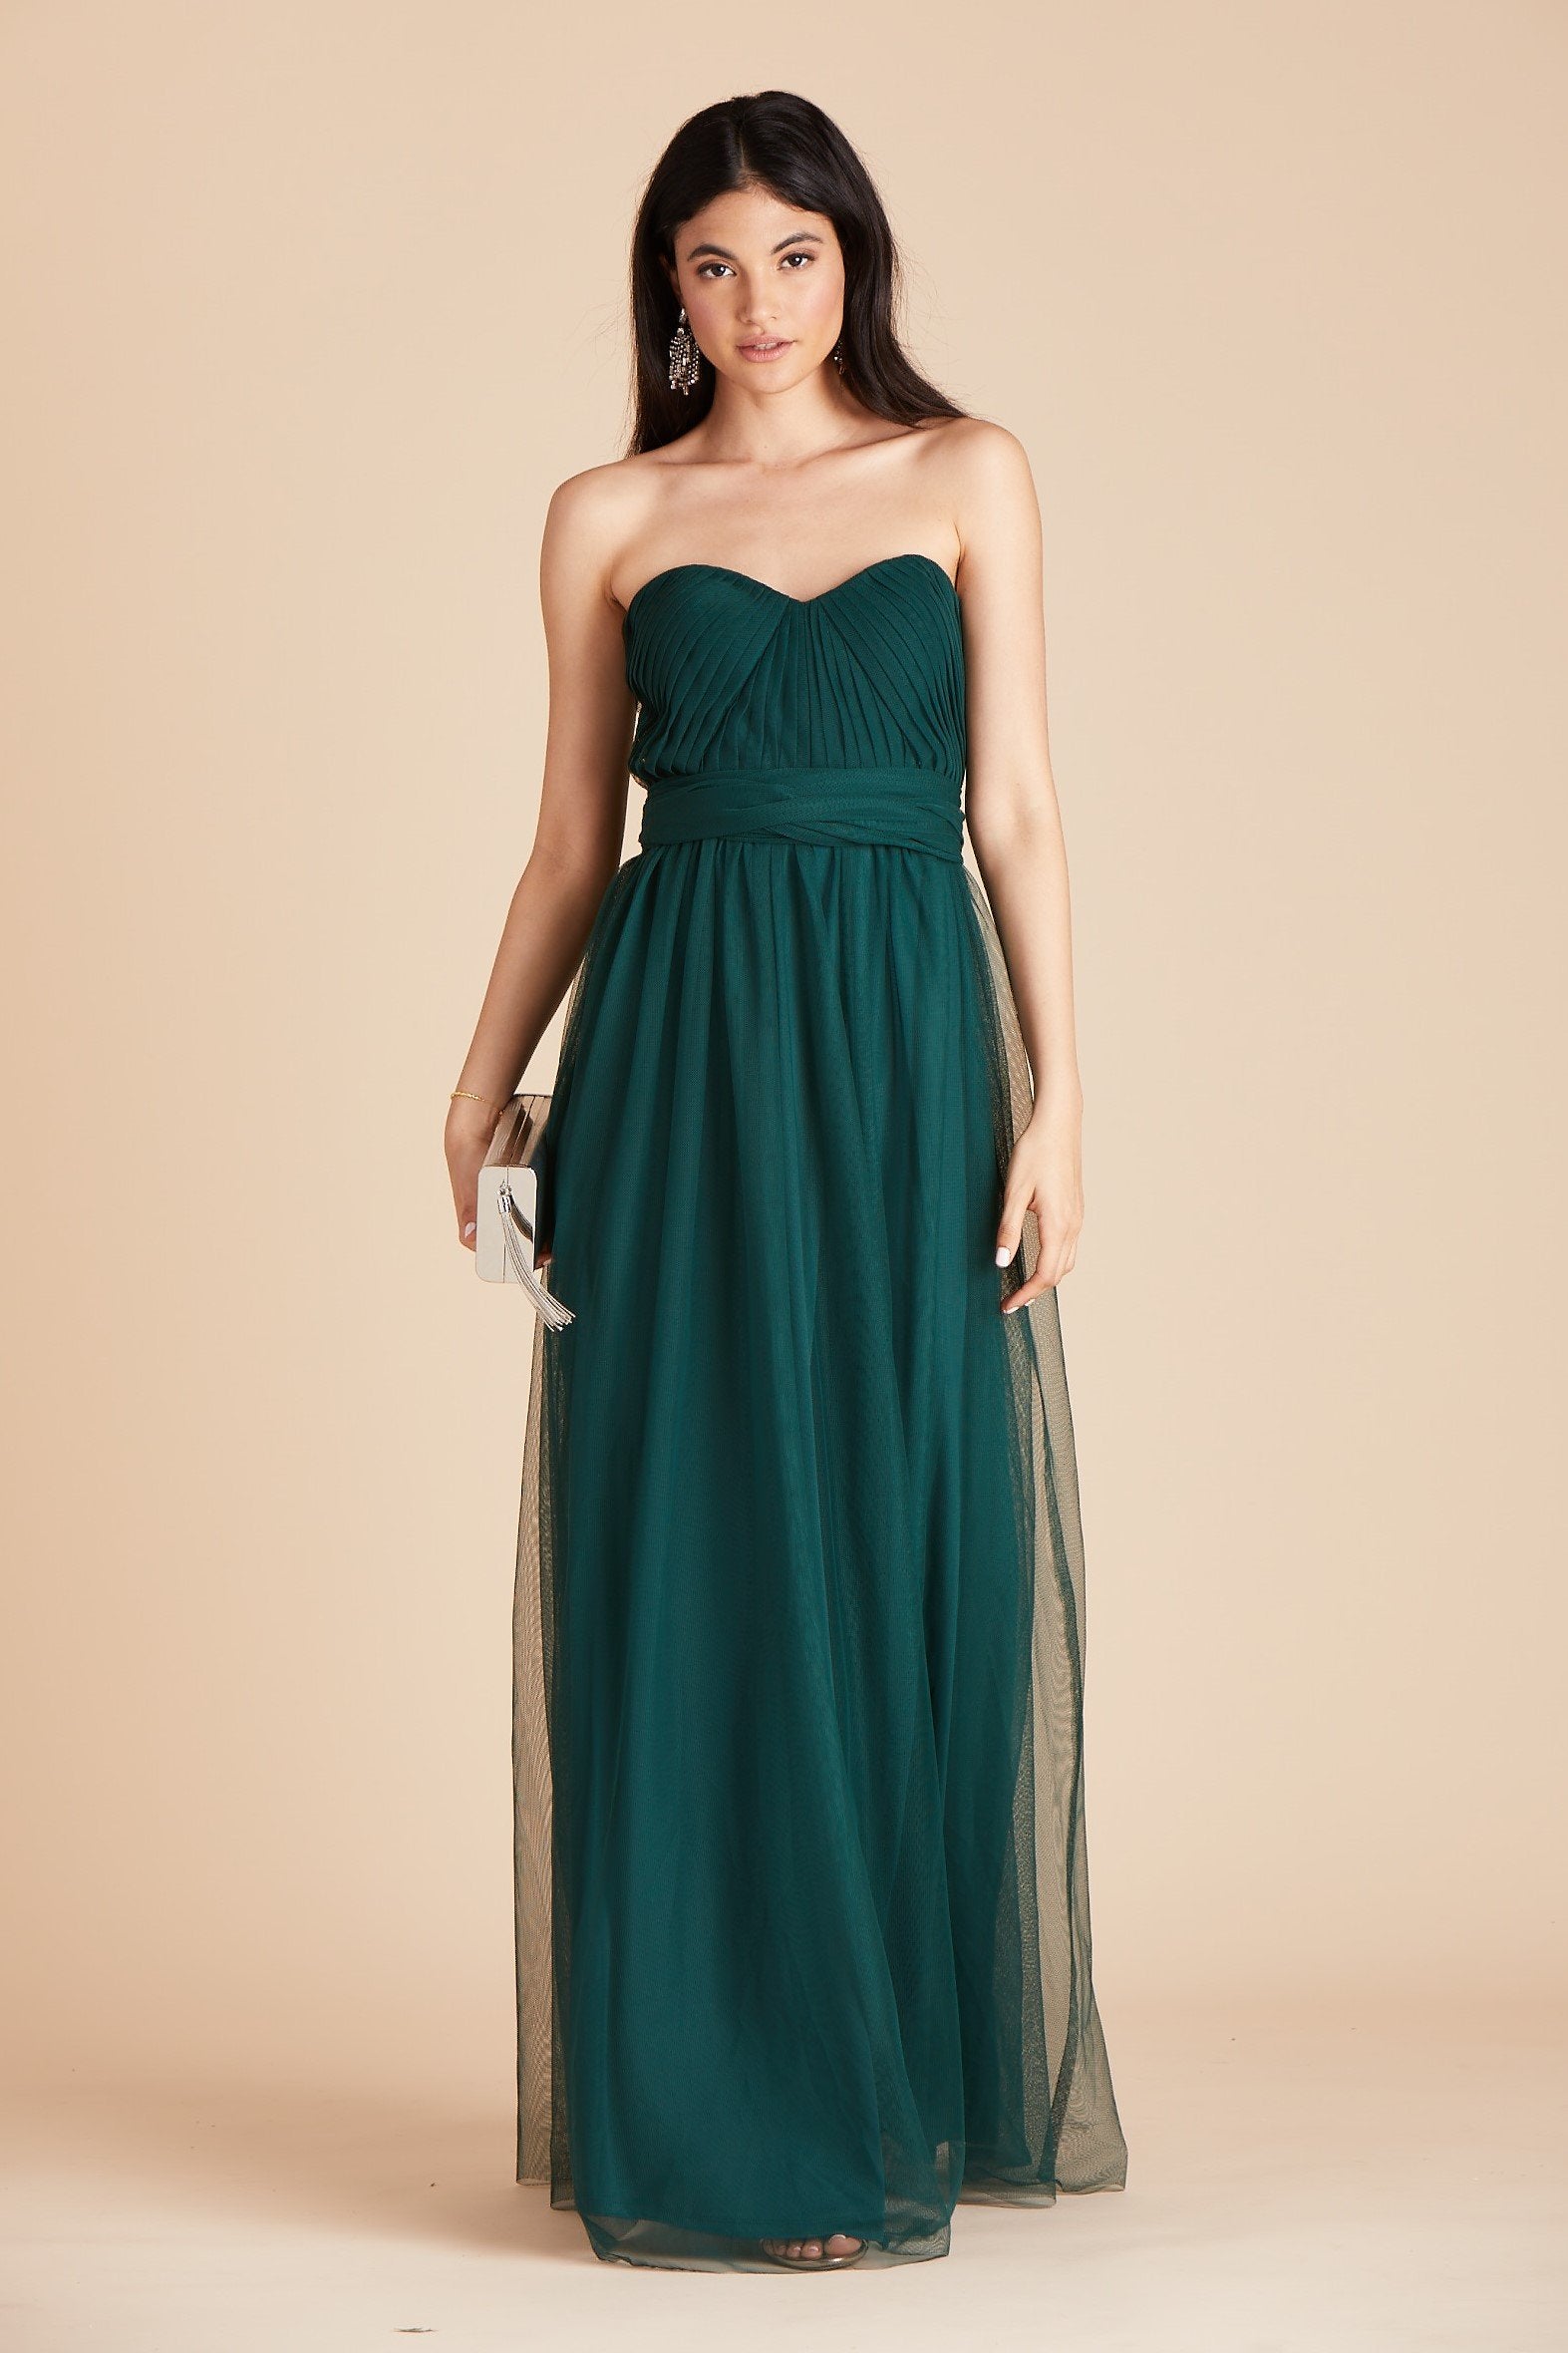 Christina convertible bridesmaid dress in emerald green tulle by Birdy Grey, front view